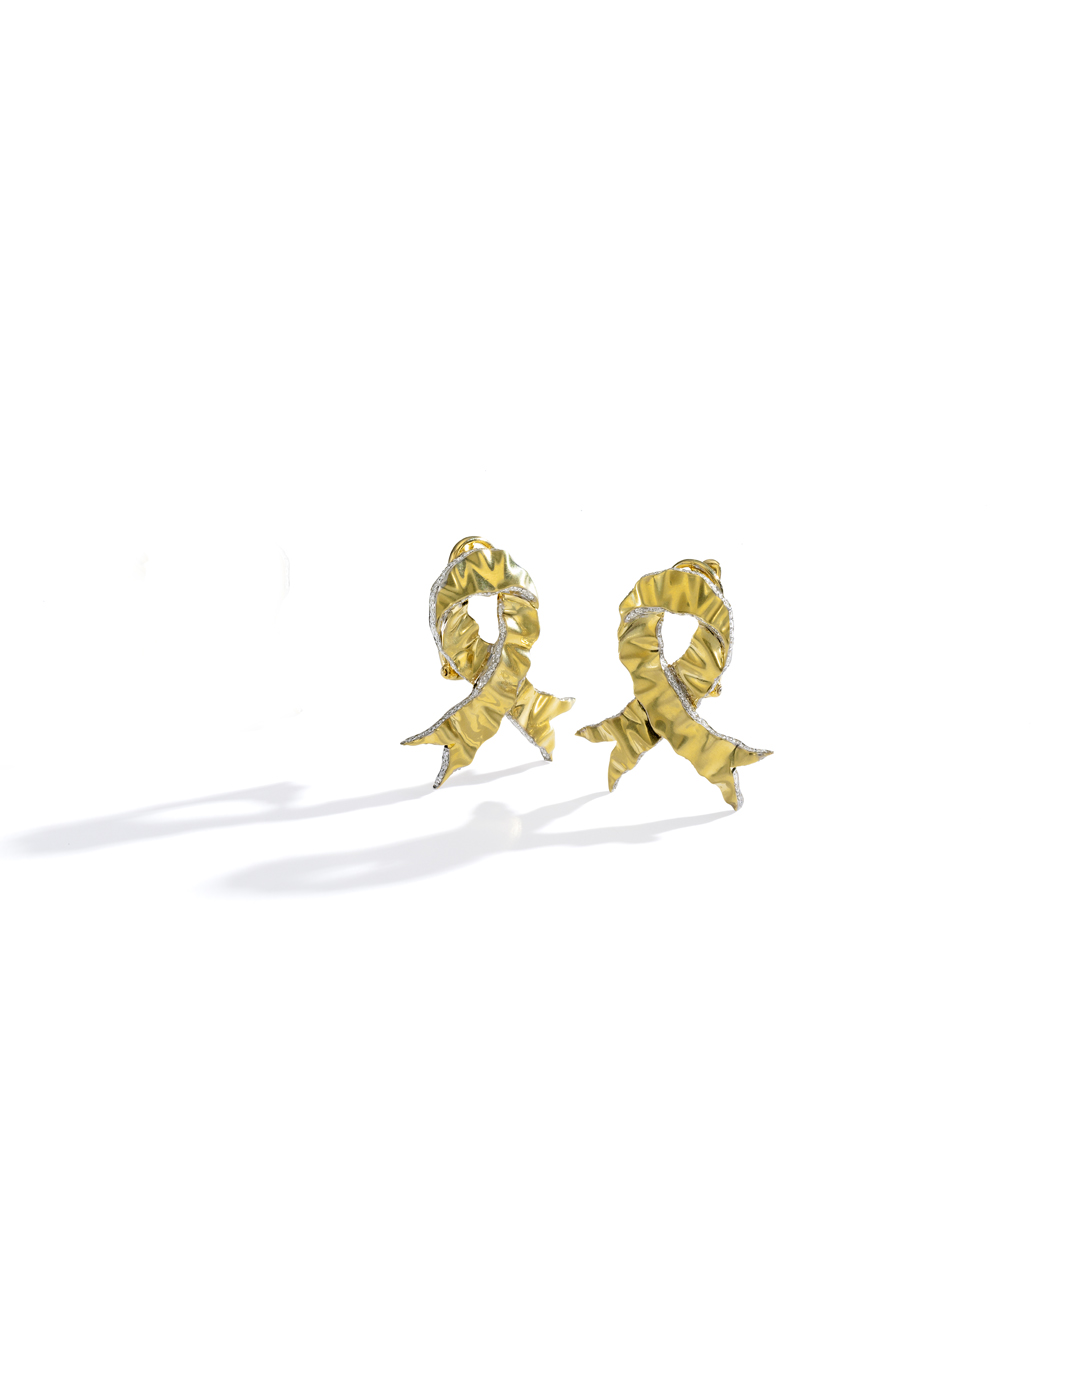 mish_products_earrings_Bond Bow-DIA-Earclip-1